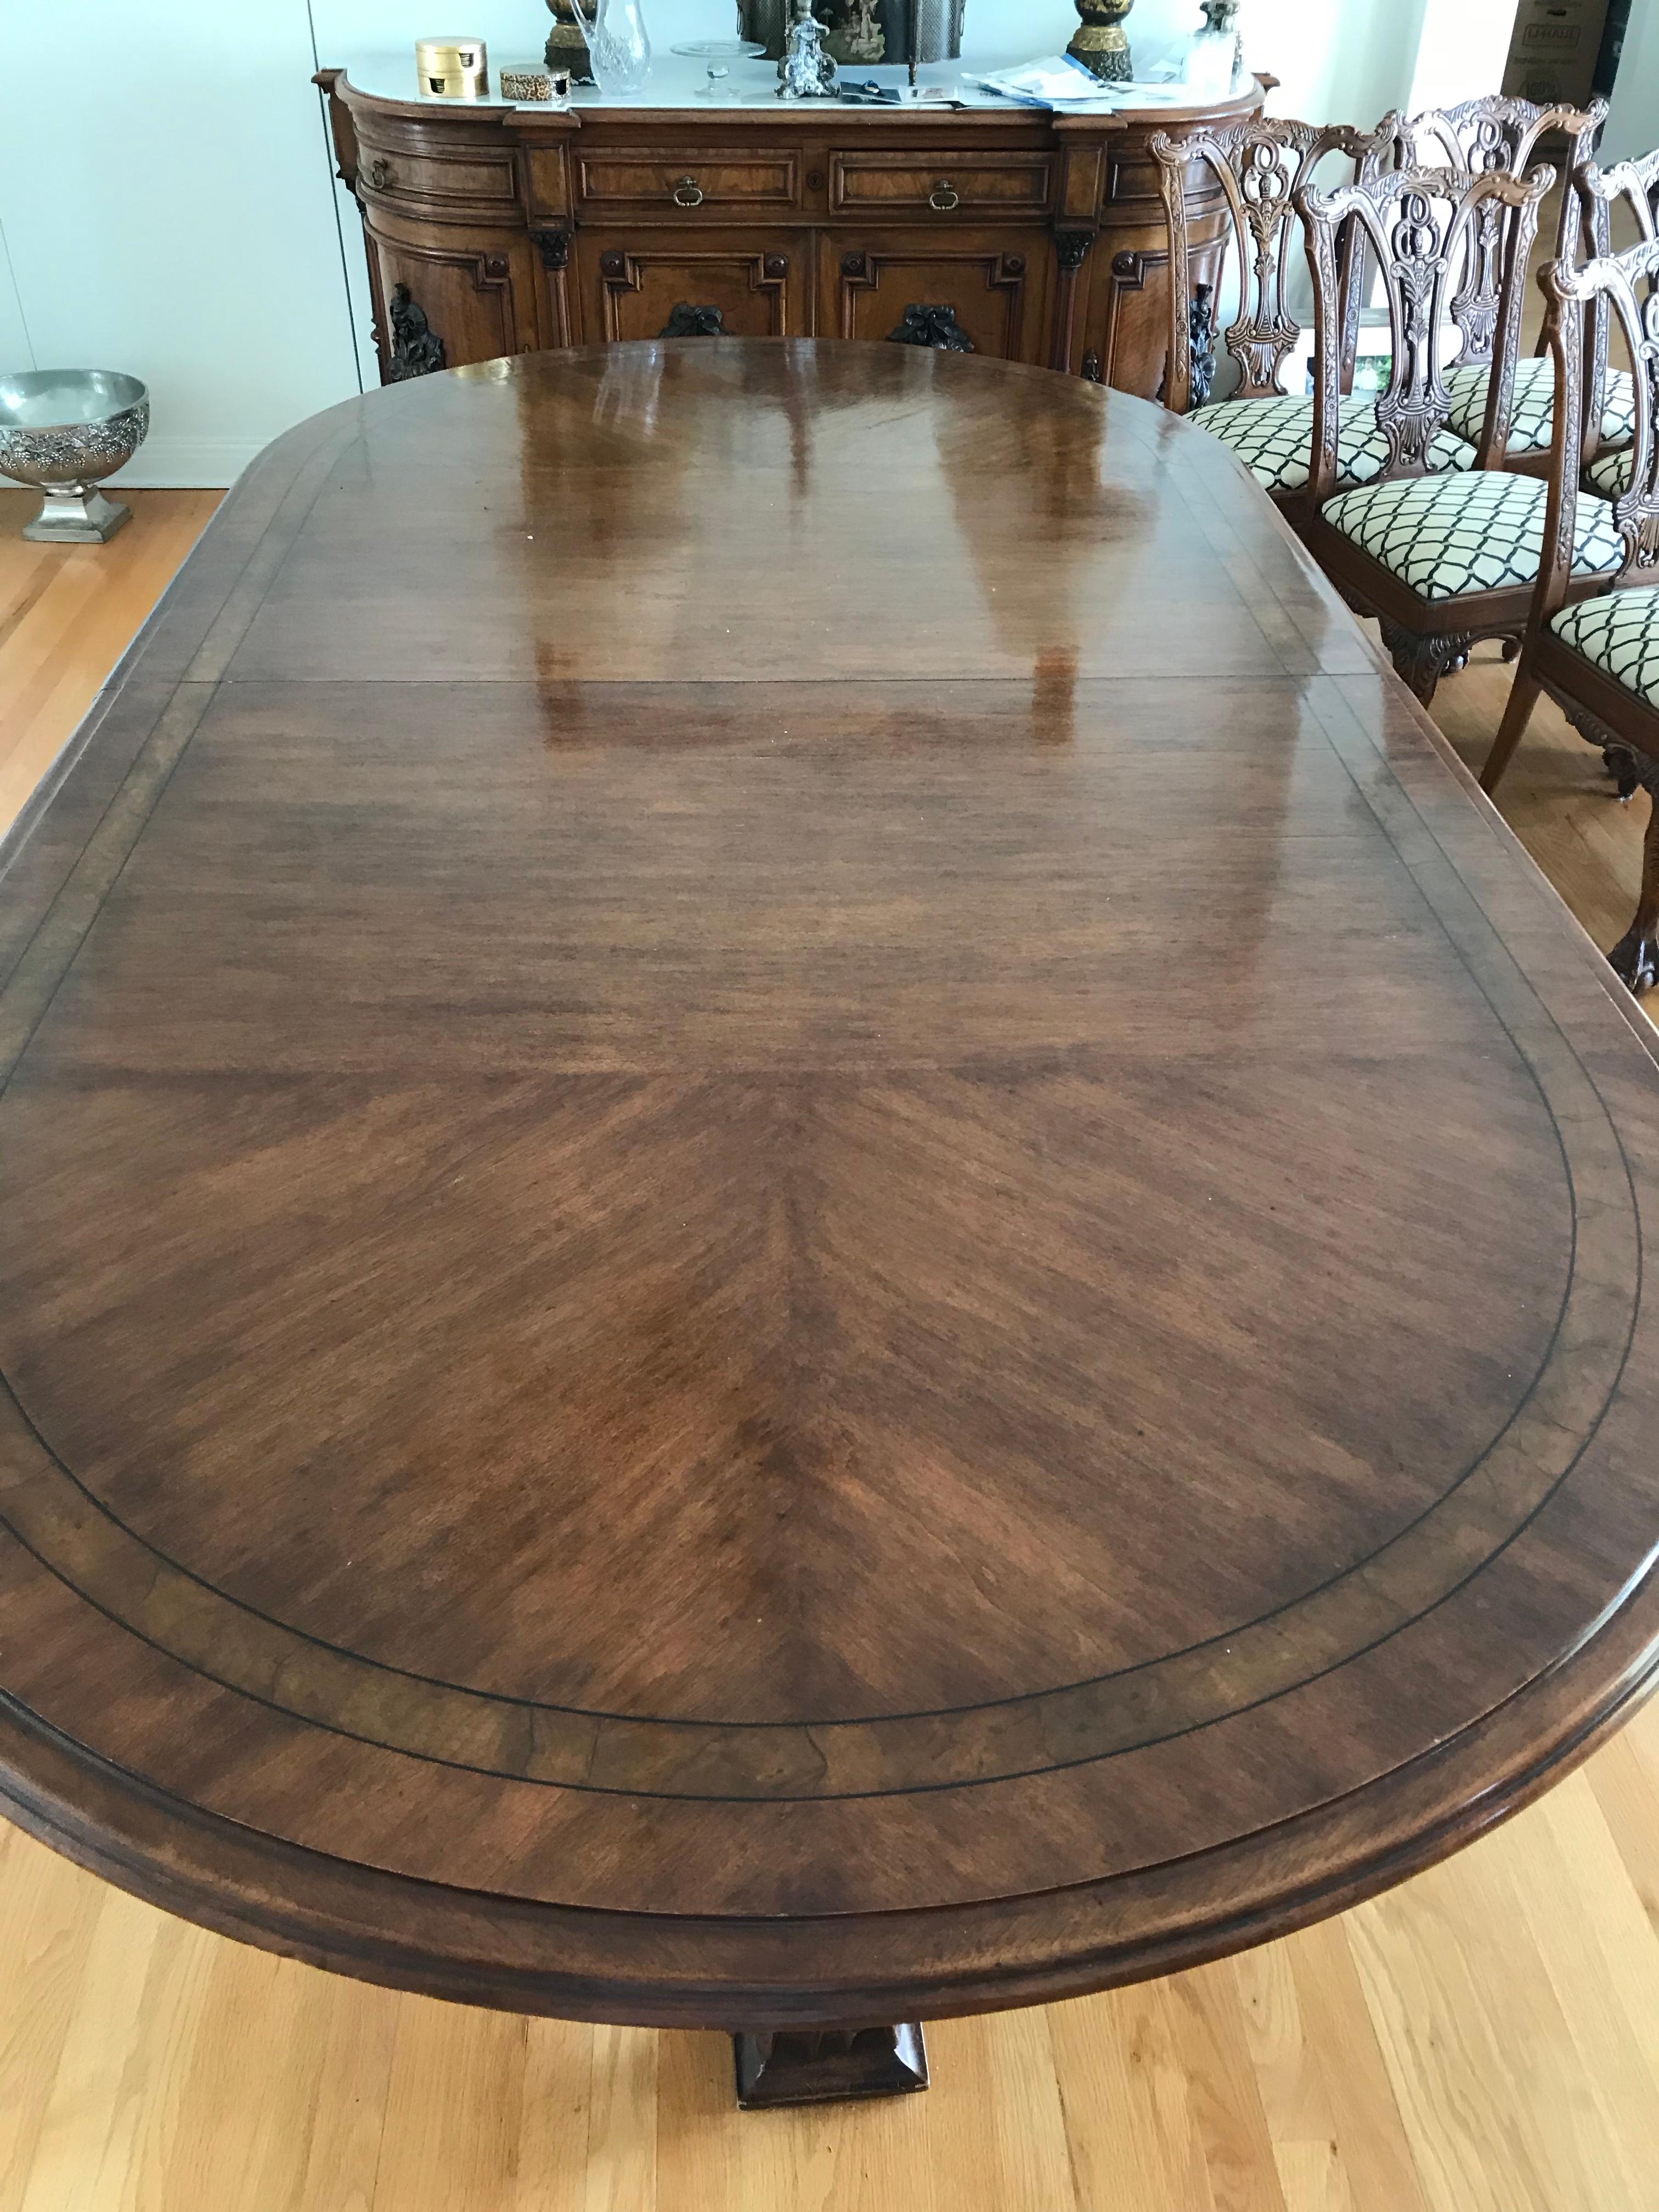 Late 20th Century Banquet Dining Table by Therien Studio Workshops